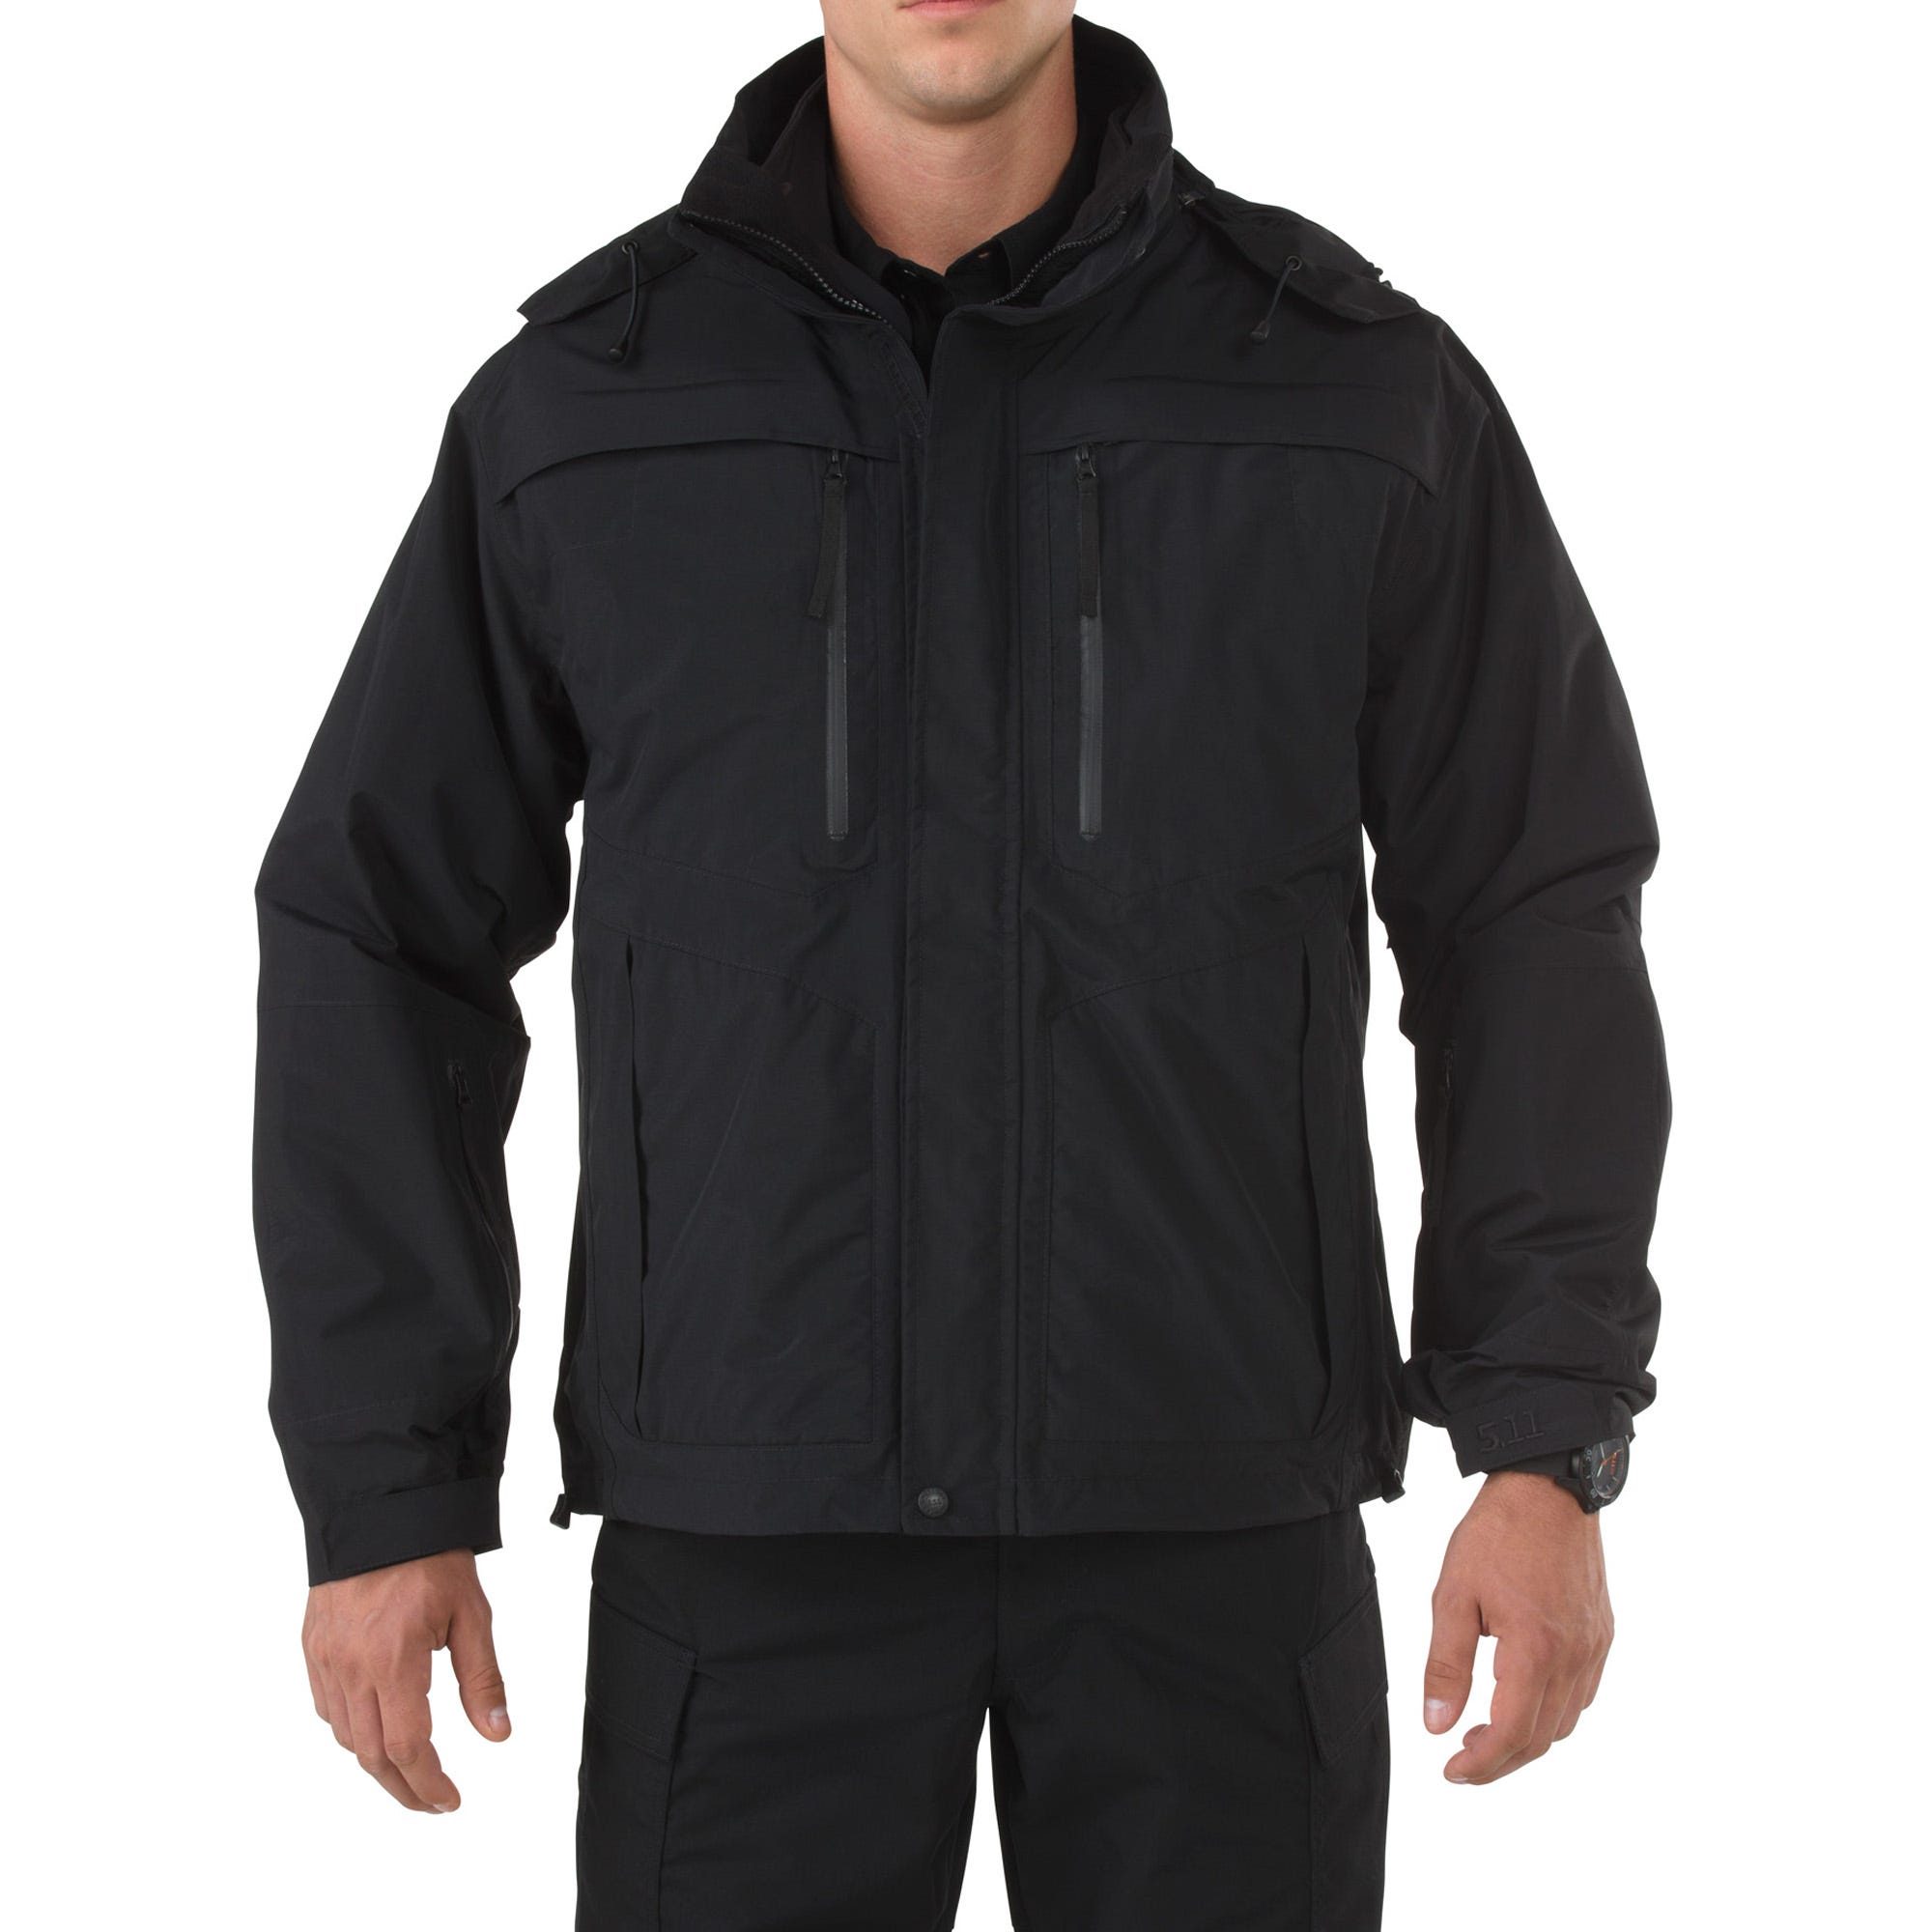 5.11 Tactical Signature Police Duty Jacket | 5.11® Tactical